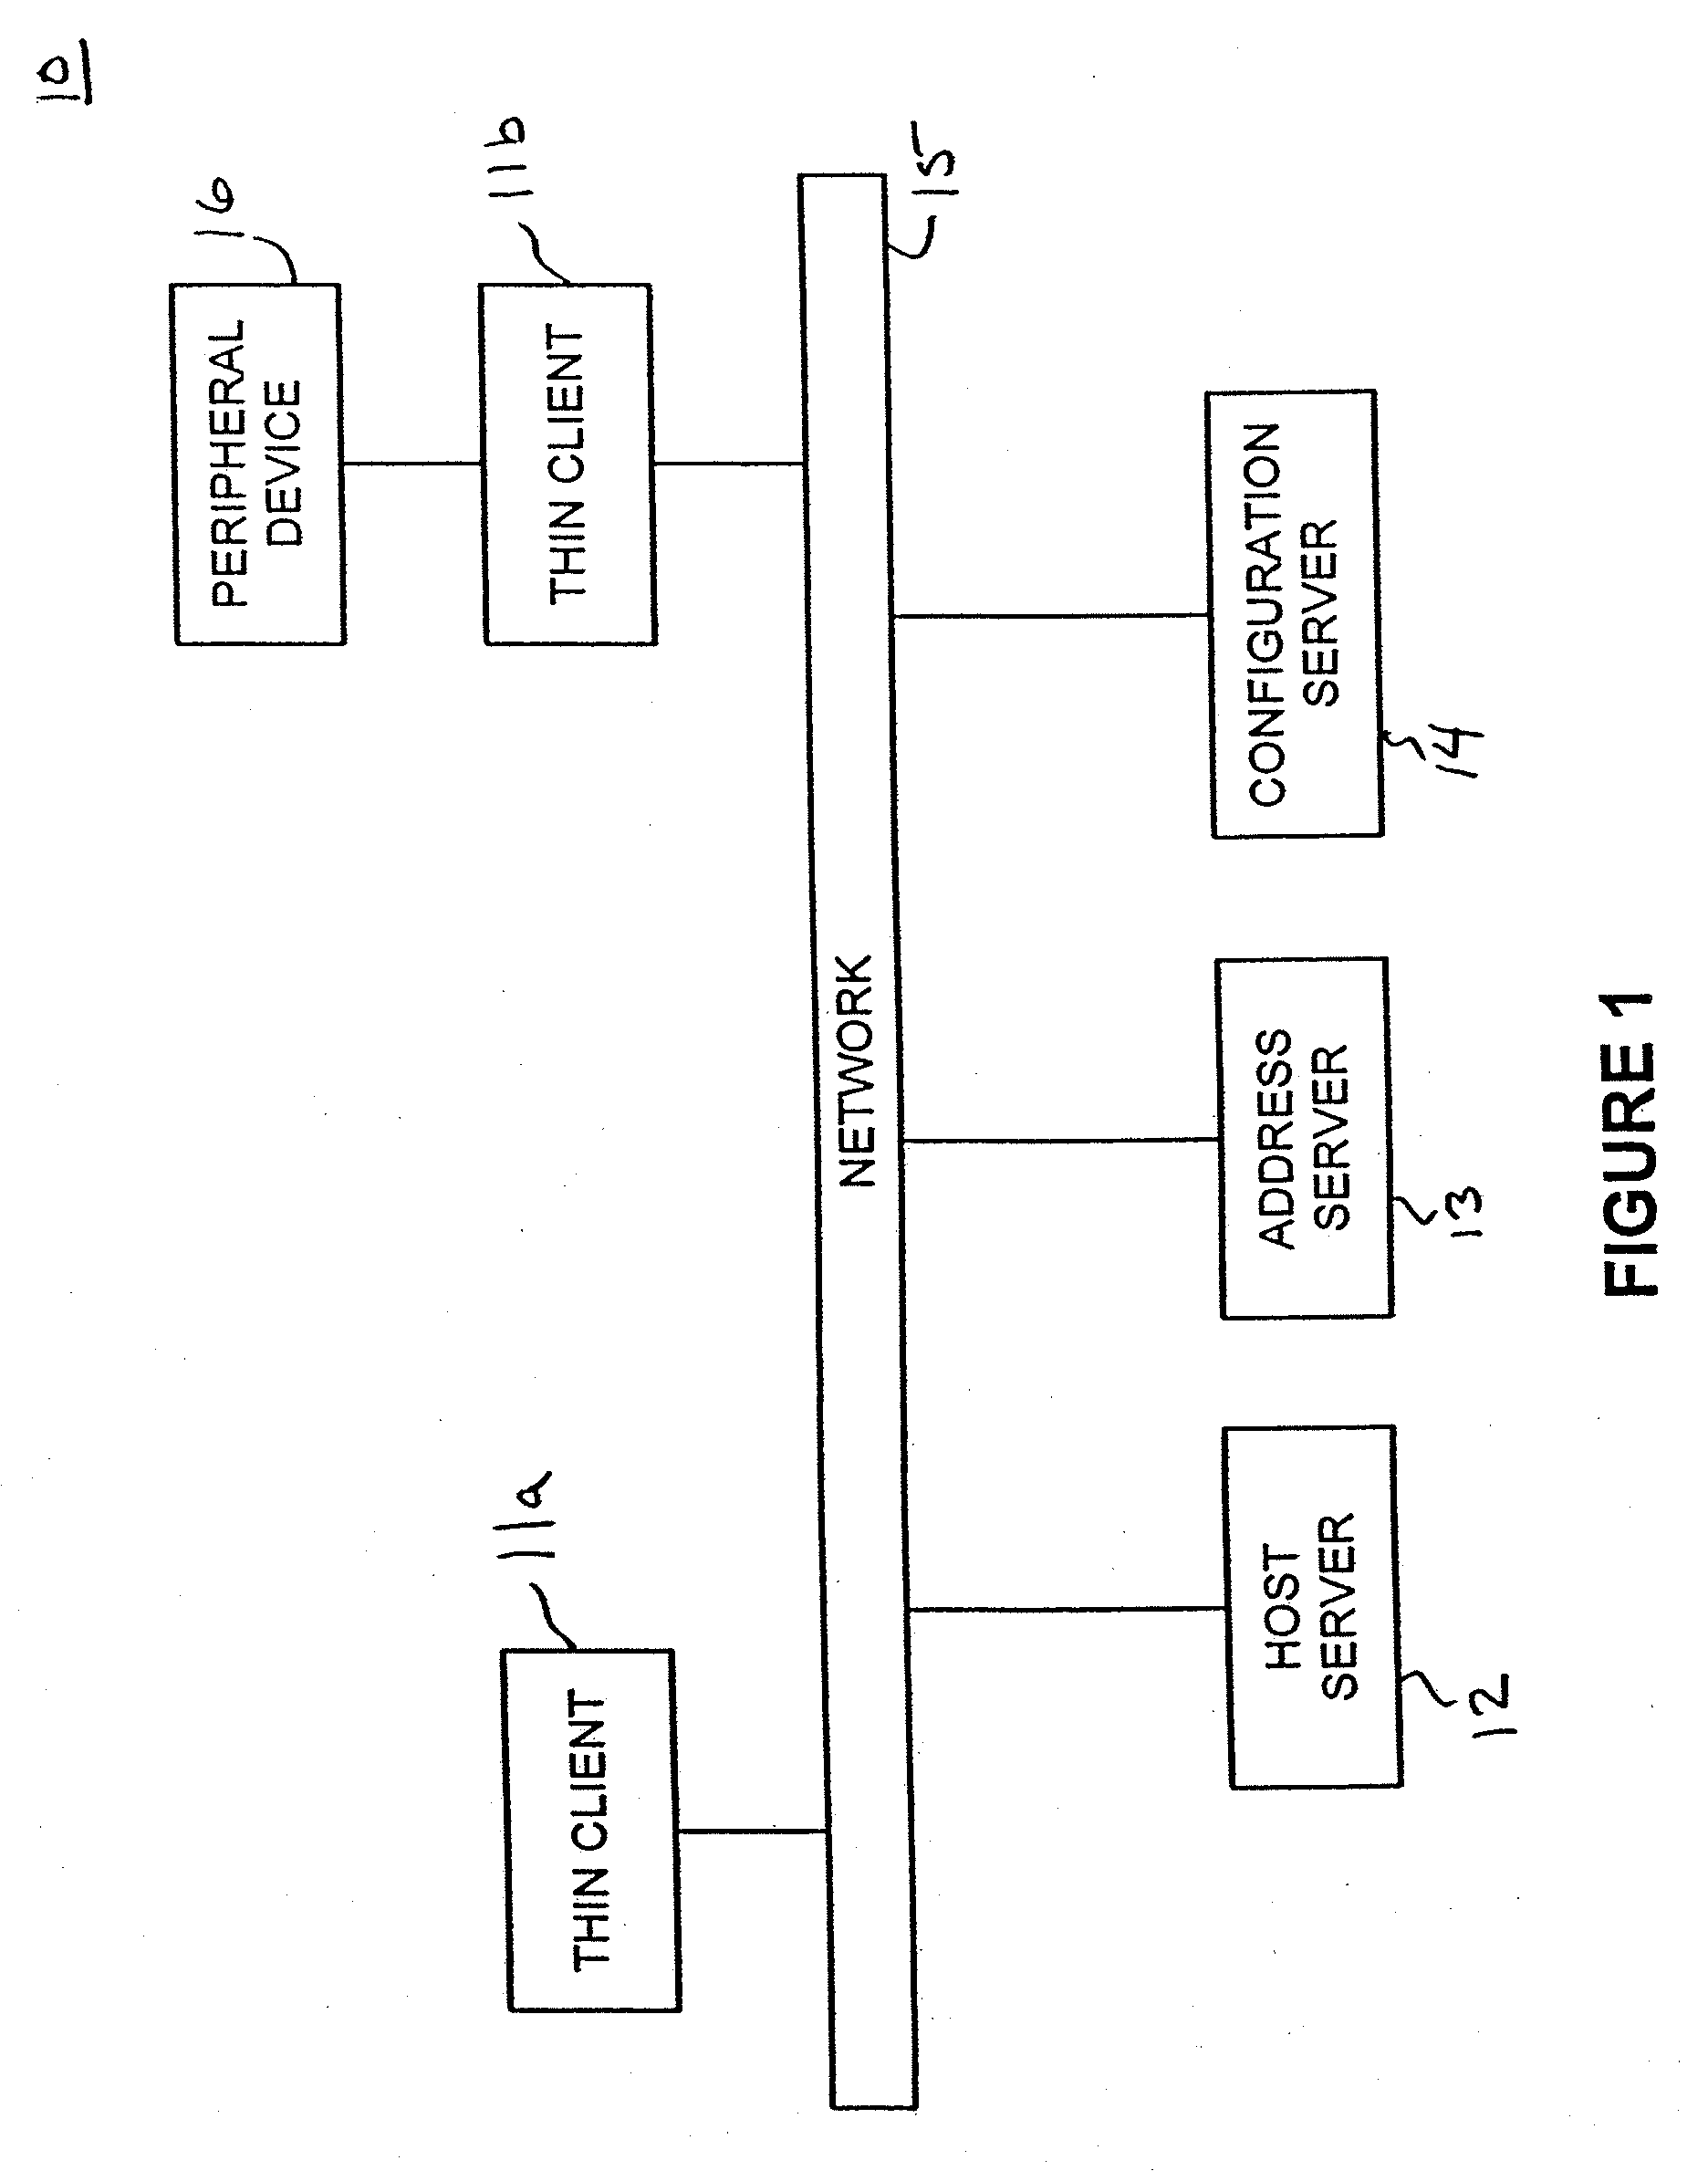 Method and system for thin client configuration